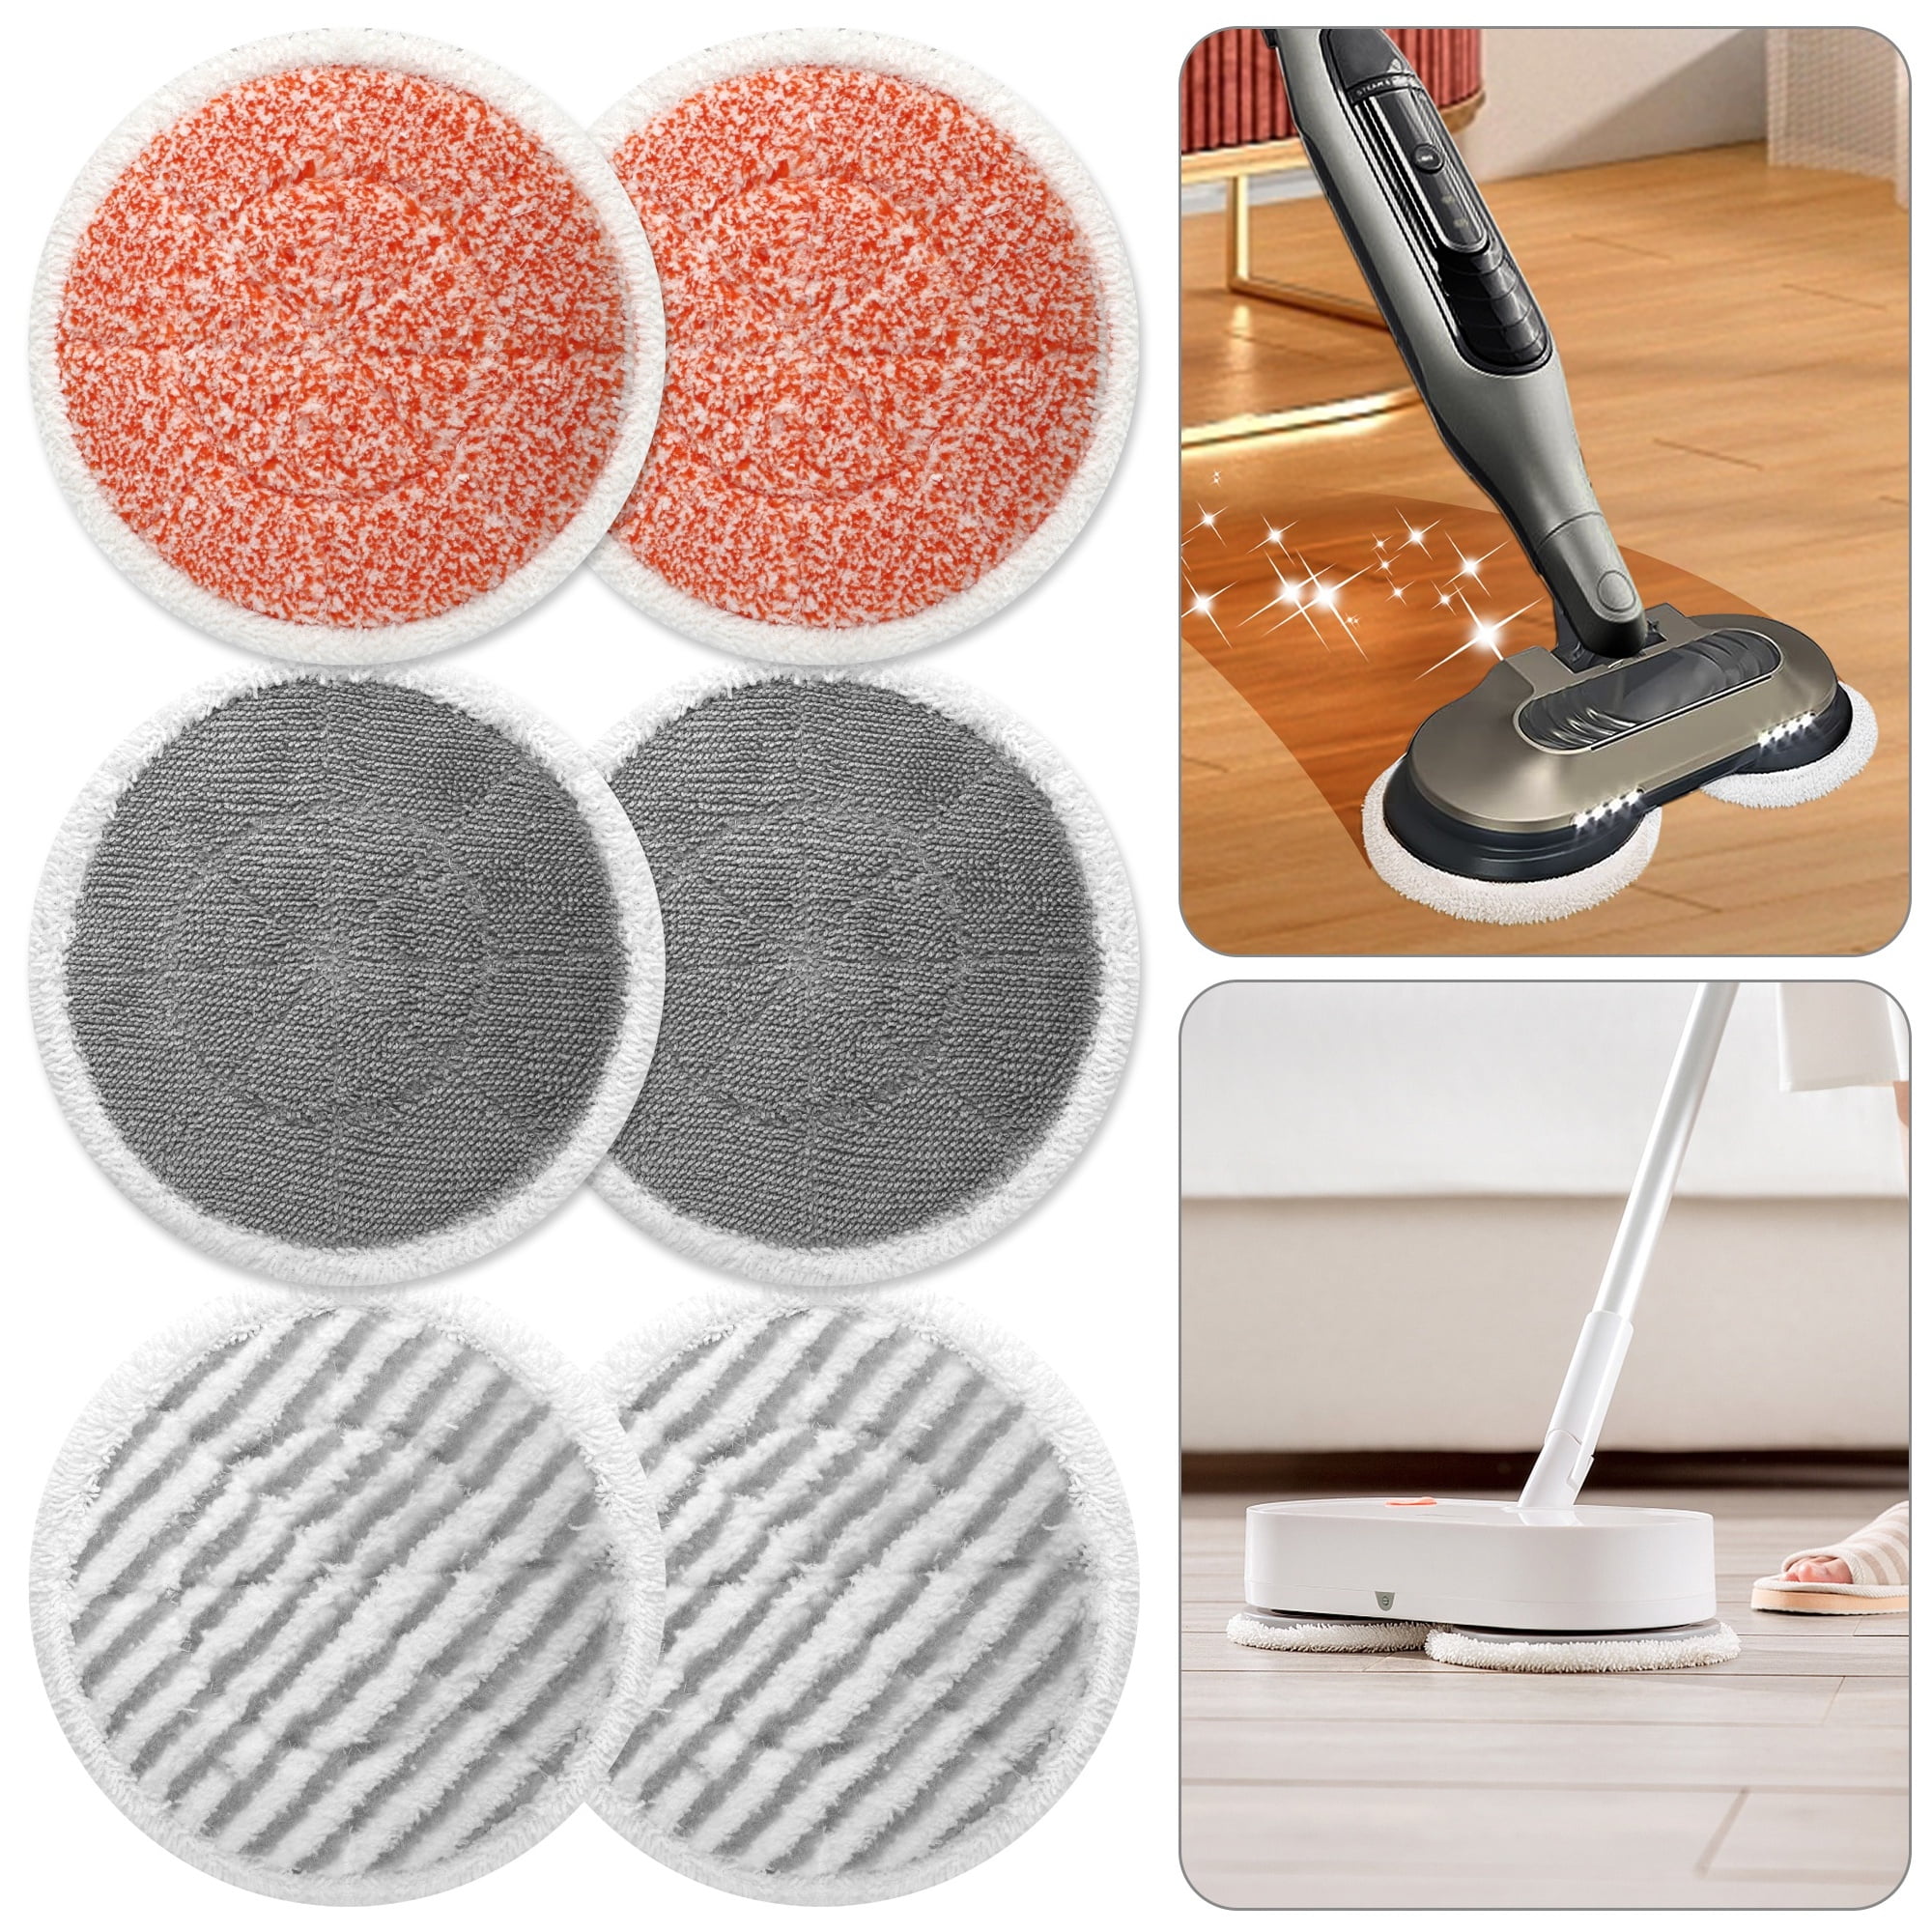  AIR U+ 8 Pack Replacement Steam Mop Pads for Shark S7000AMZ  S7001 S7201 S7020 Steam Mop, Steam & Scrub All-in-One Scrubbing and  Sanitizing, Dirt Grip Scrub Washable Pads